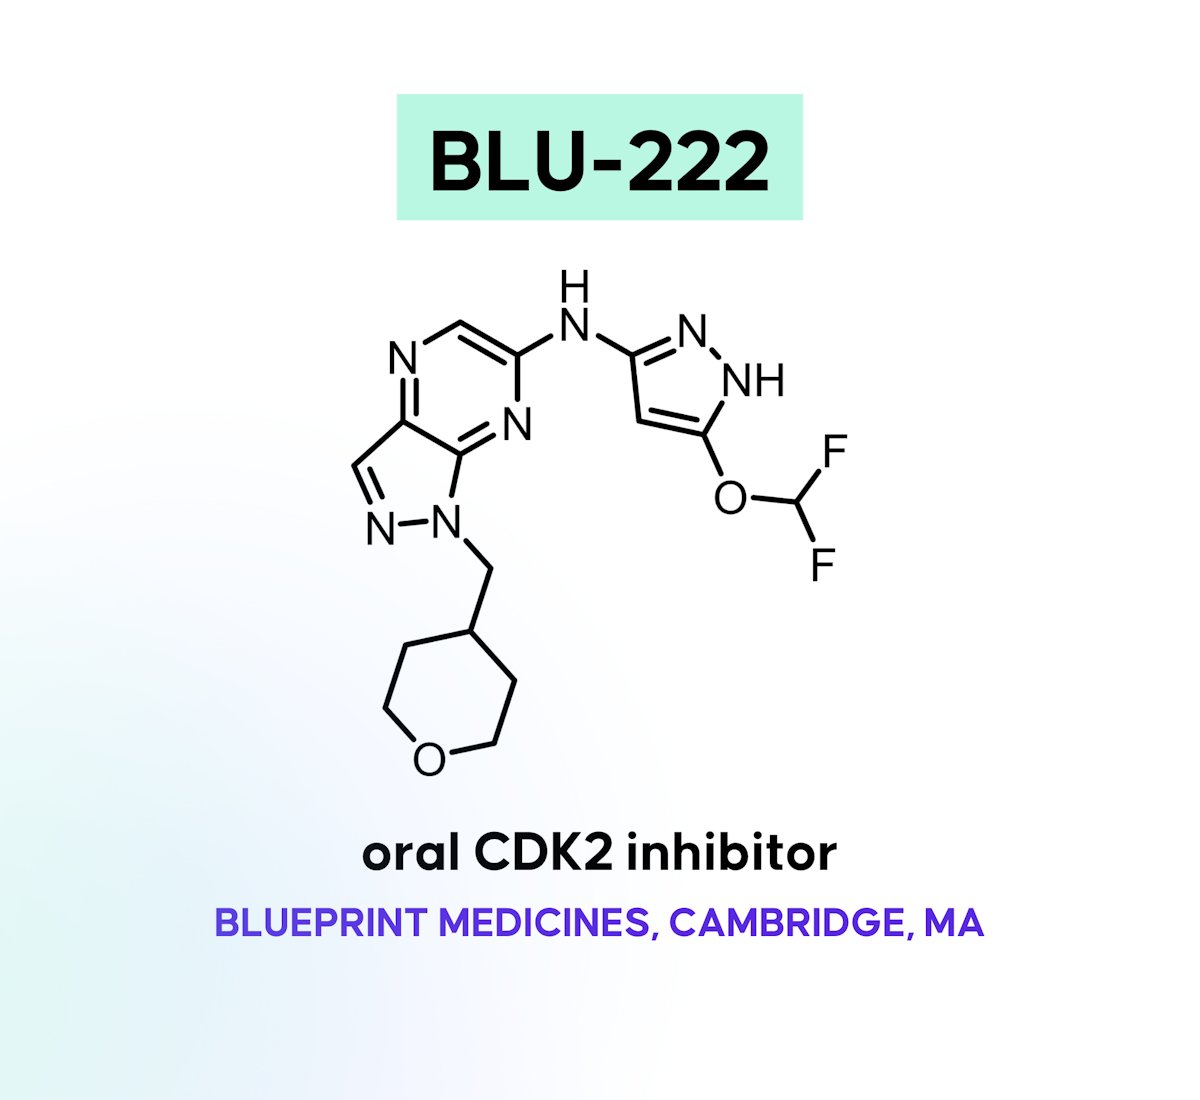 Blueprint’s Selective CDK2 Inhibitor

Learn about the discovery story, how exquisite kinome selectivity can be achieved, interim clinical data, and more in this full case study about BLU-222.

Article | drughunters.com/4dAgCs5